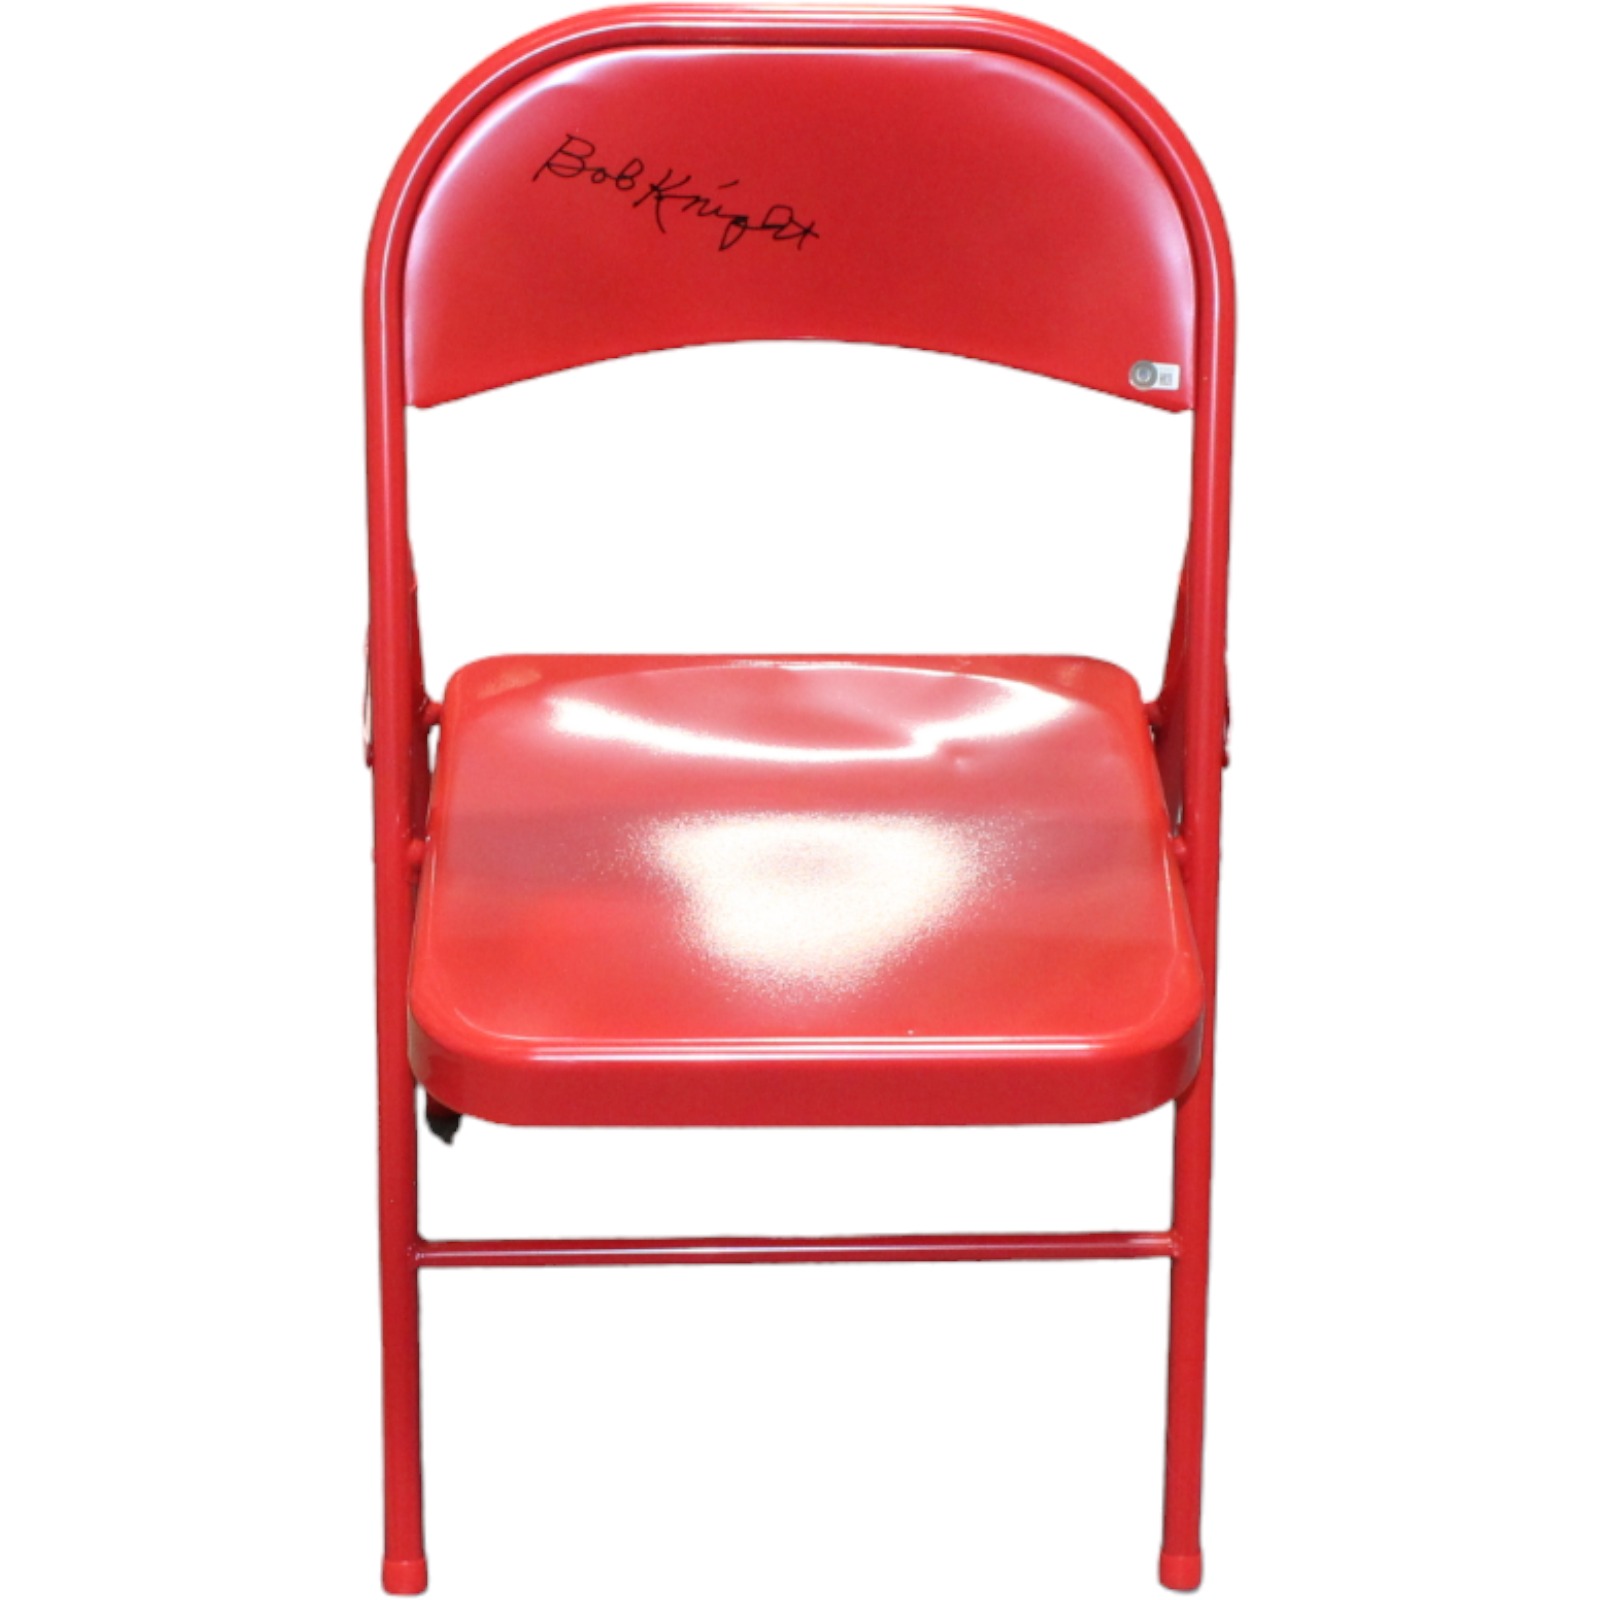 Bobby Knight Autographed/Signed Indiana Hoosiers Red Folding Chair BAS